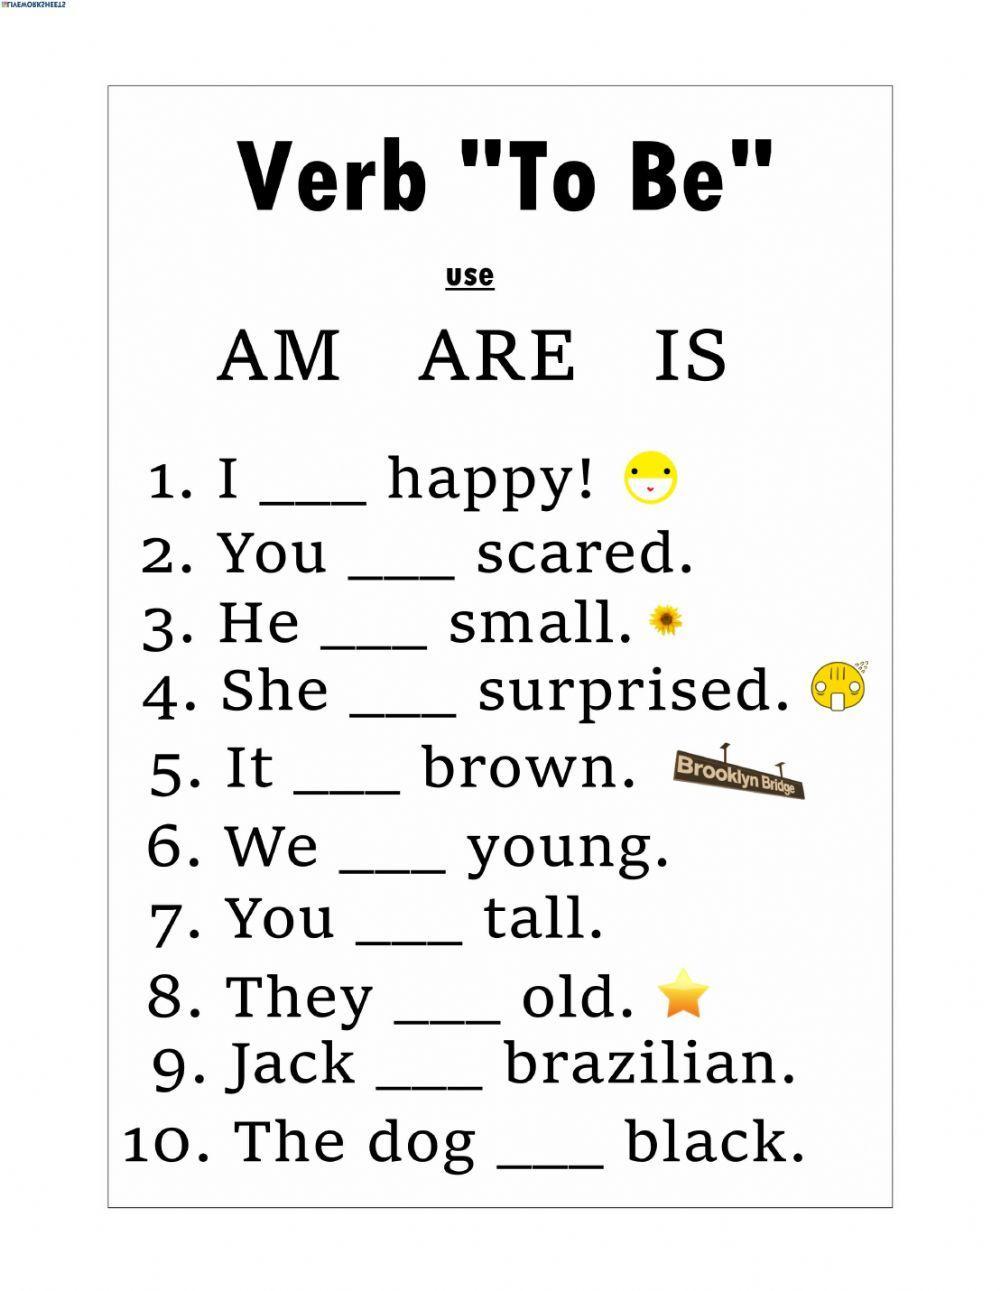 Verb to be (am, is, are)